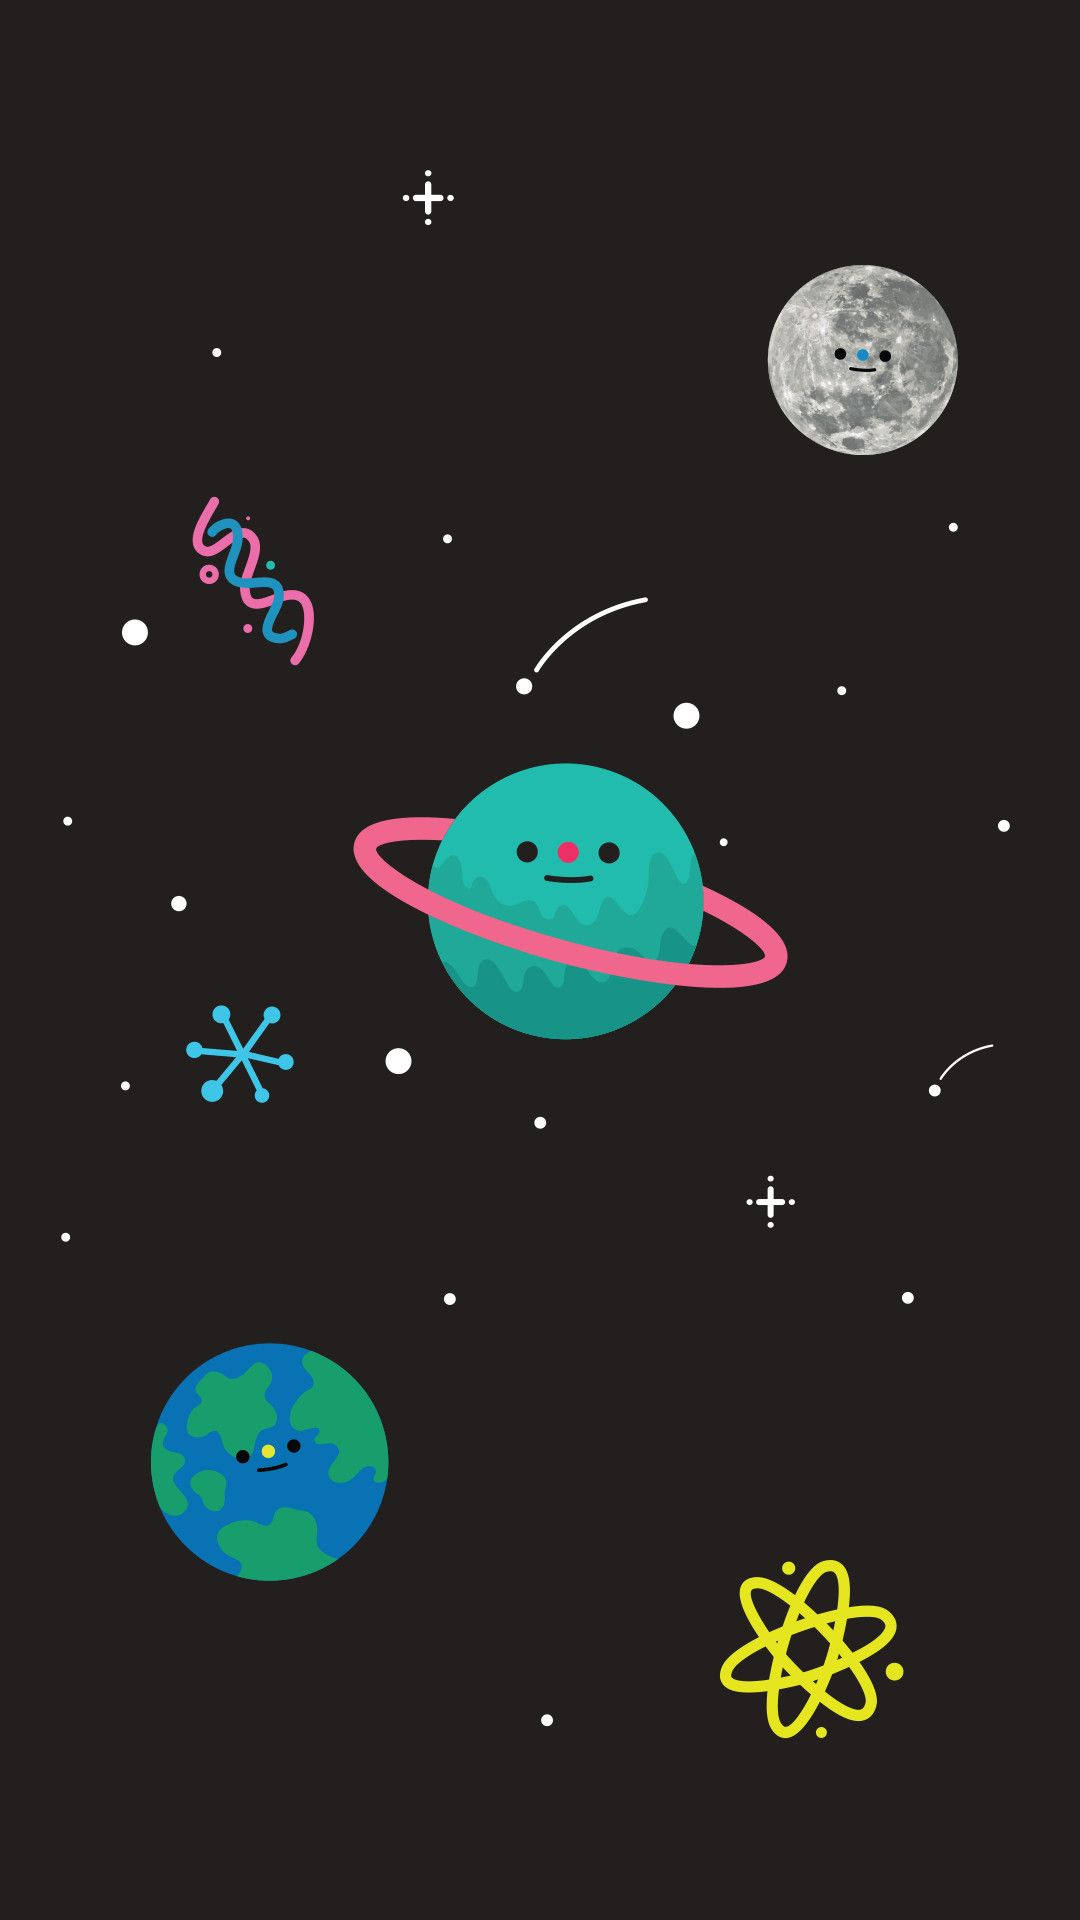 Cute space and planets art wallpaper.